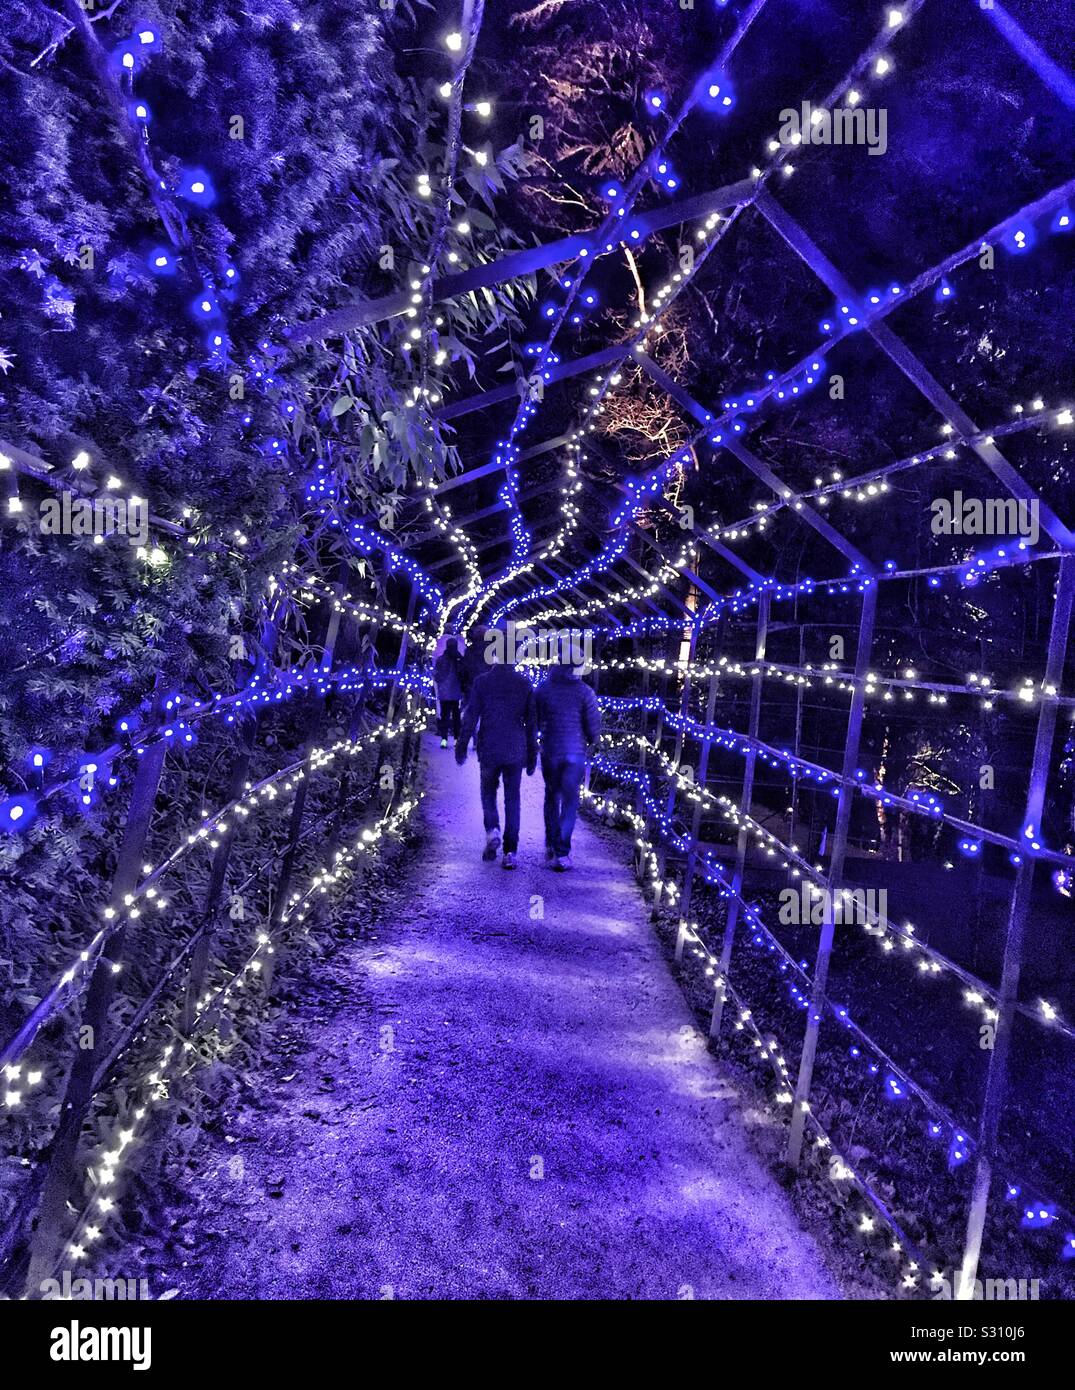 Blenheim Palace Illuminated Christmas Light Trail 2019 - Tunnel Of Blue And  White Lights With People Walking Through Stock Photo - Alamy